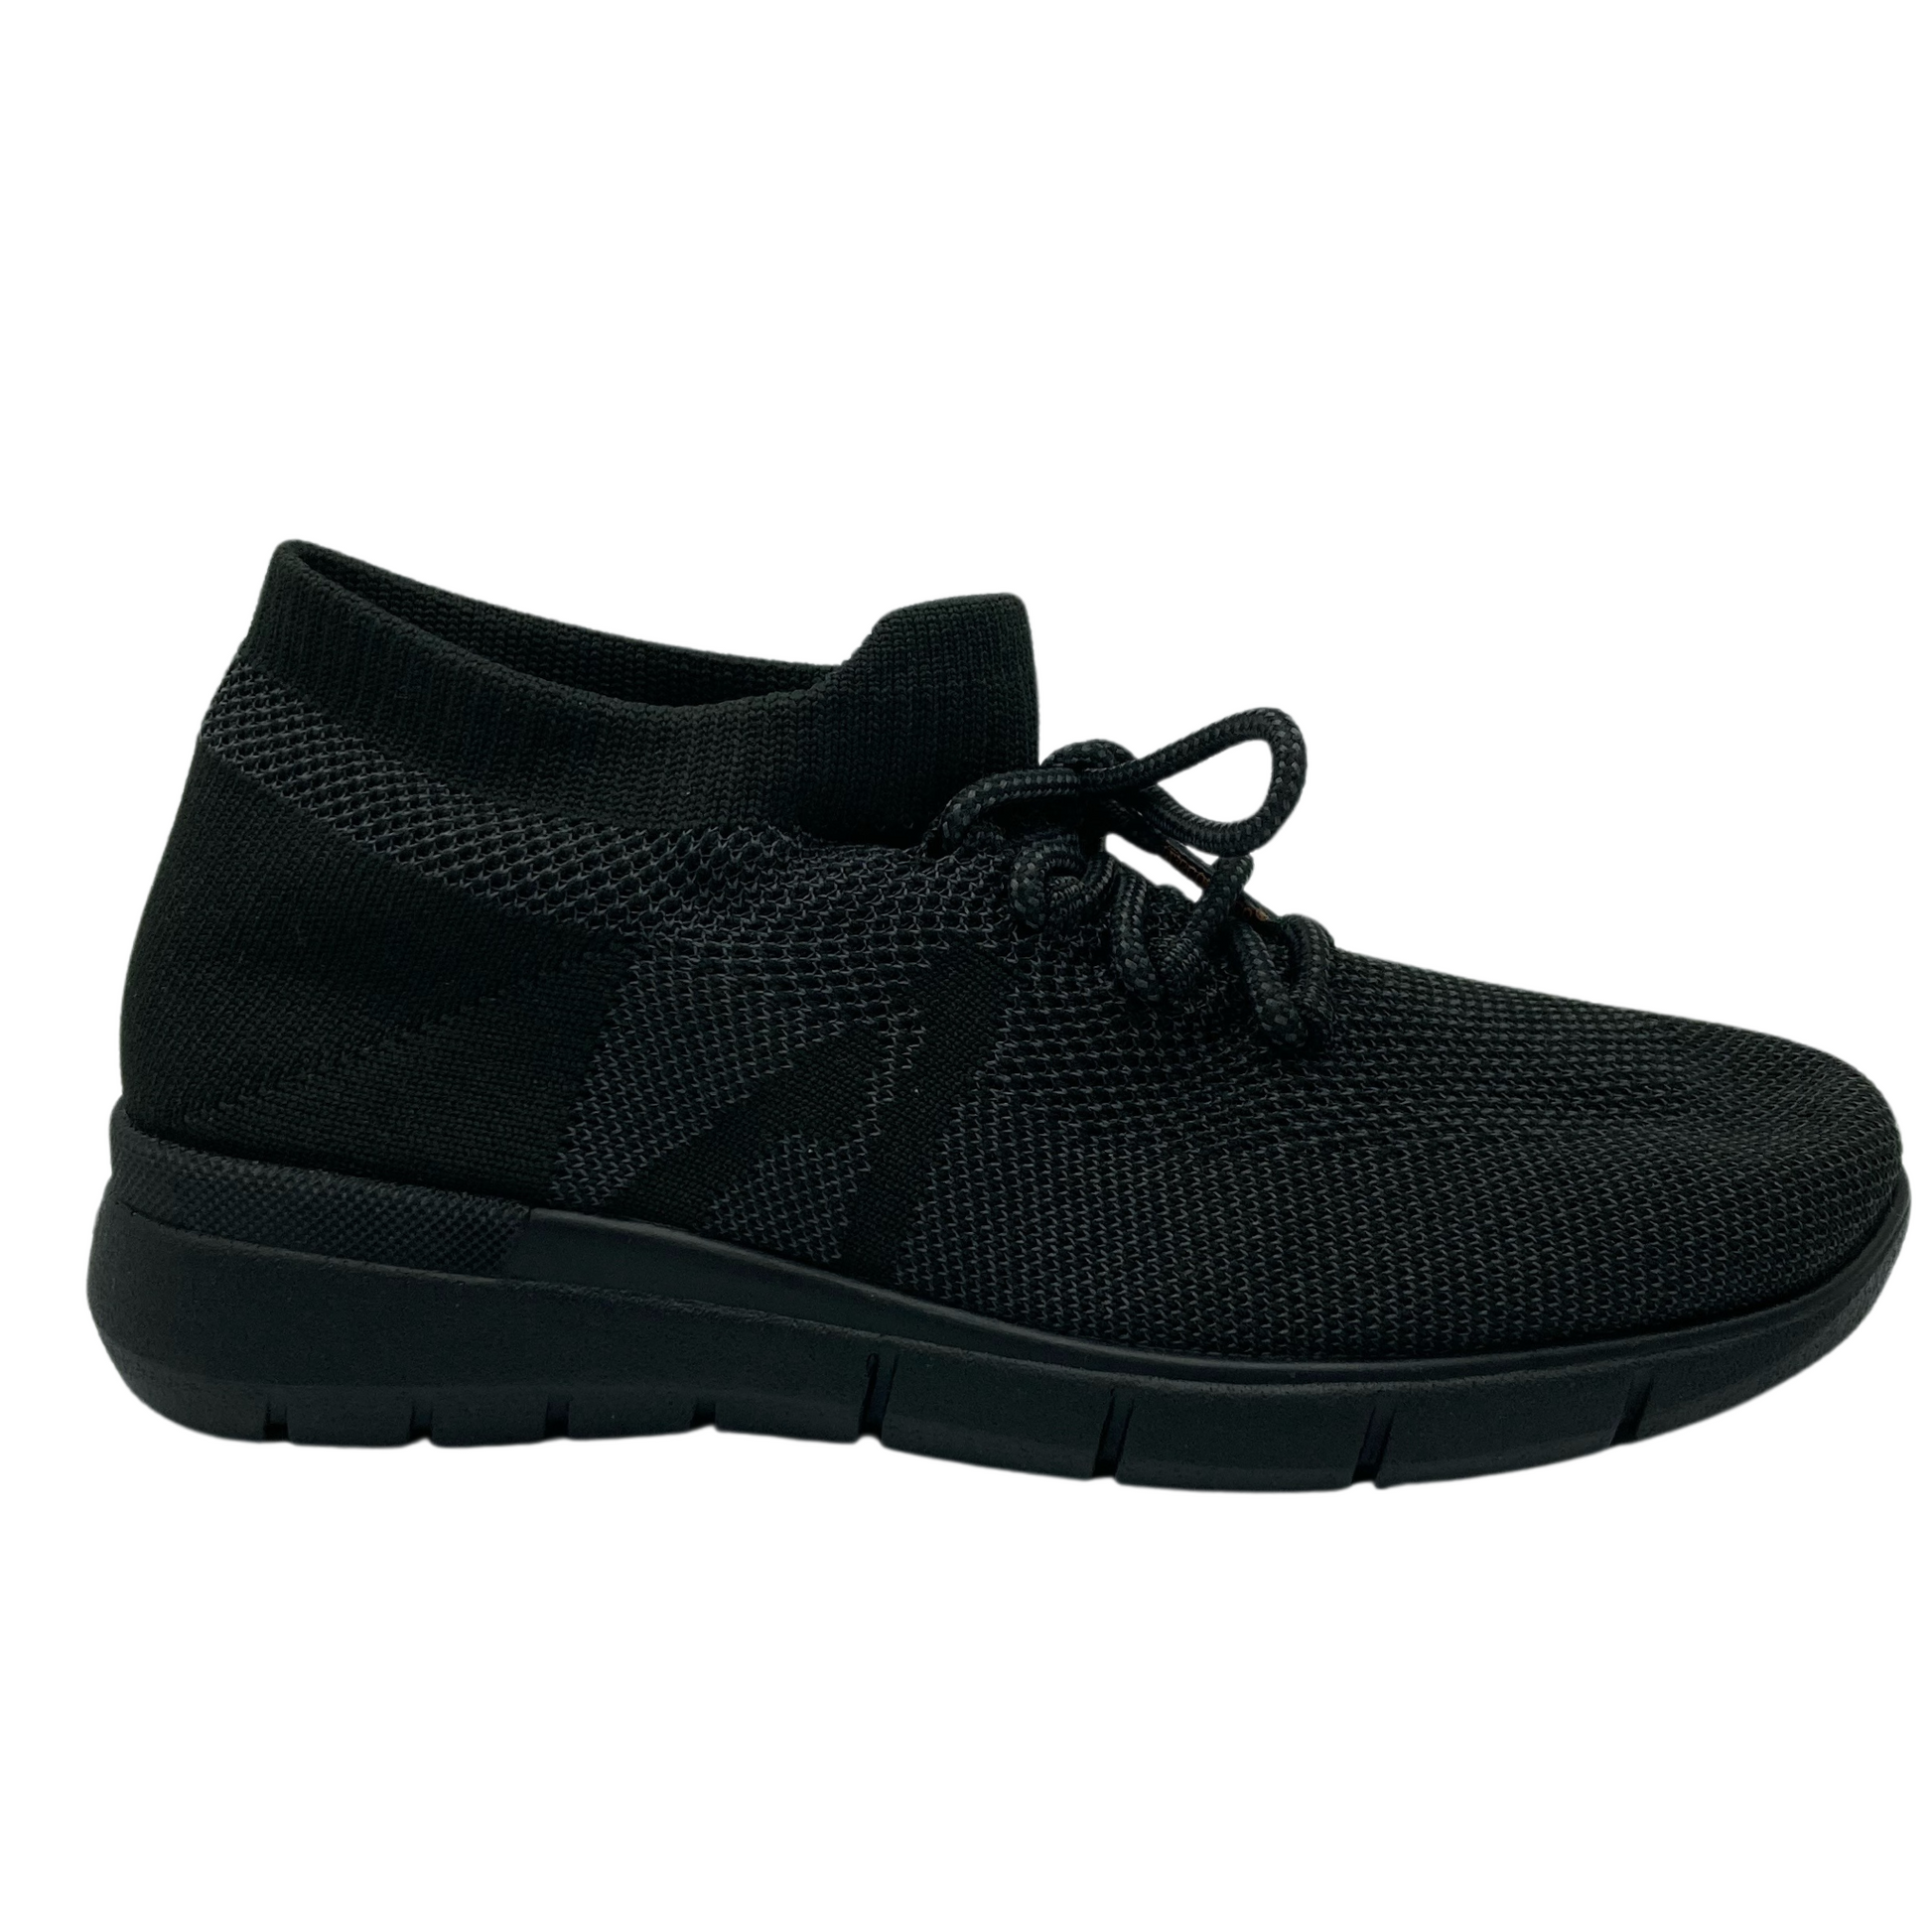 Right facing view of black mesh sneaker with black outsole